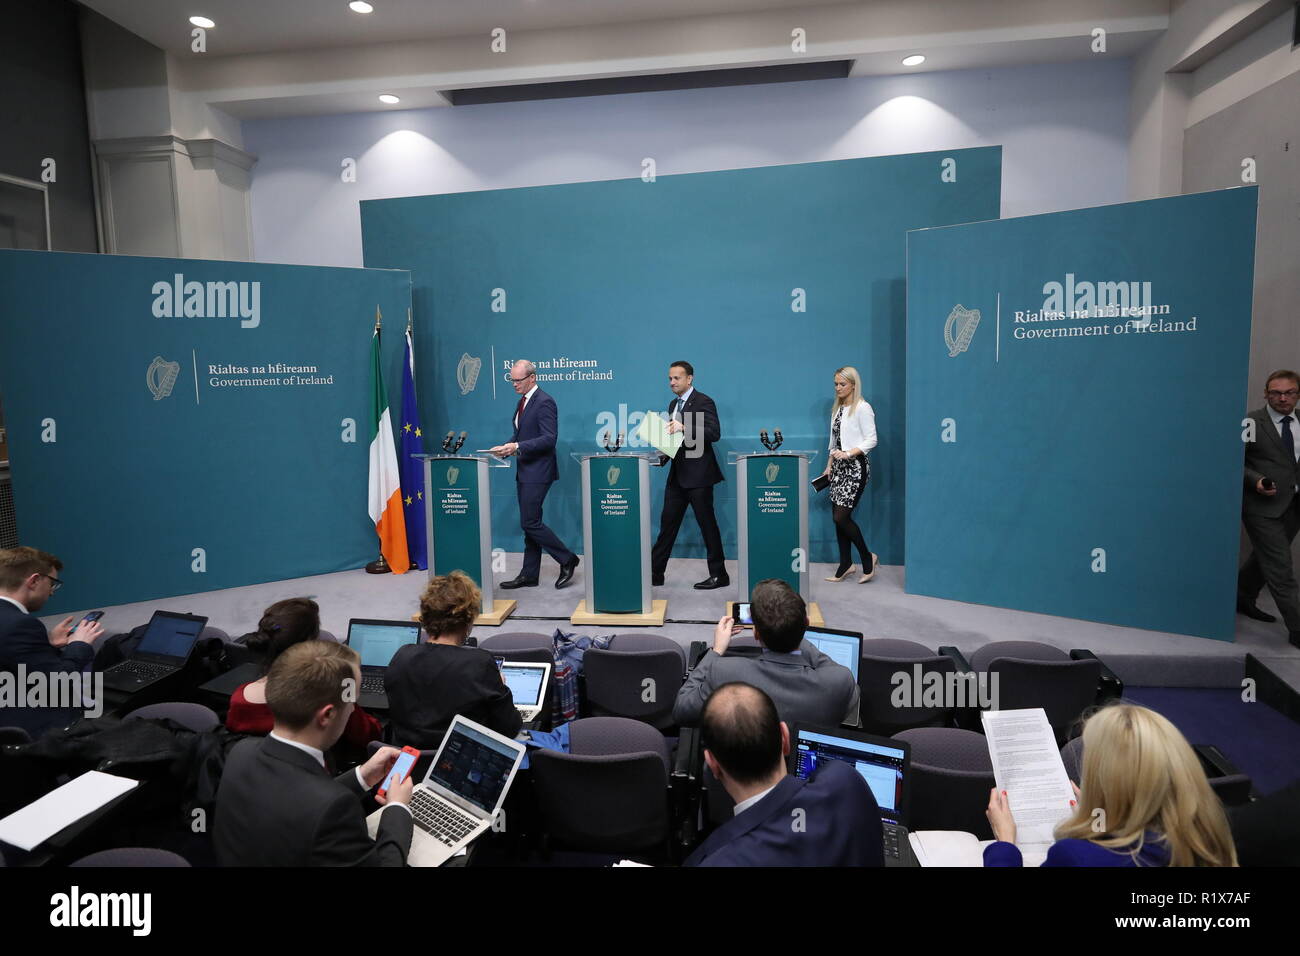 Taoiseach Leo Varadkar, Tanaiste Simon Coveney and Minister for European affairs Helen McEntee enter the stage to speak at a press conference on Brexit at government buildings in Dublin. Stock Photo